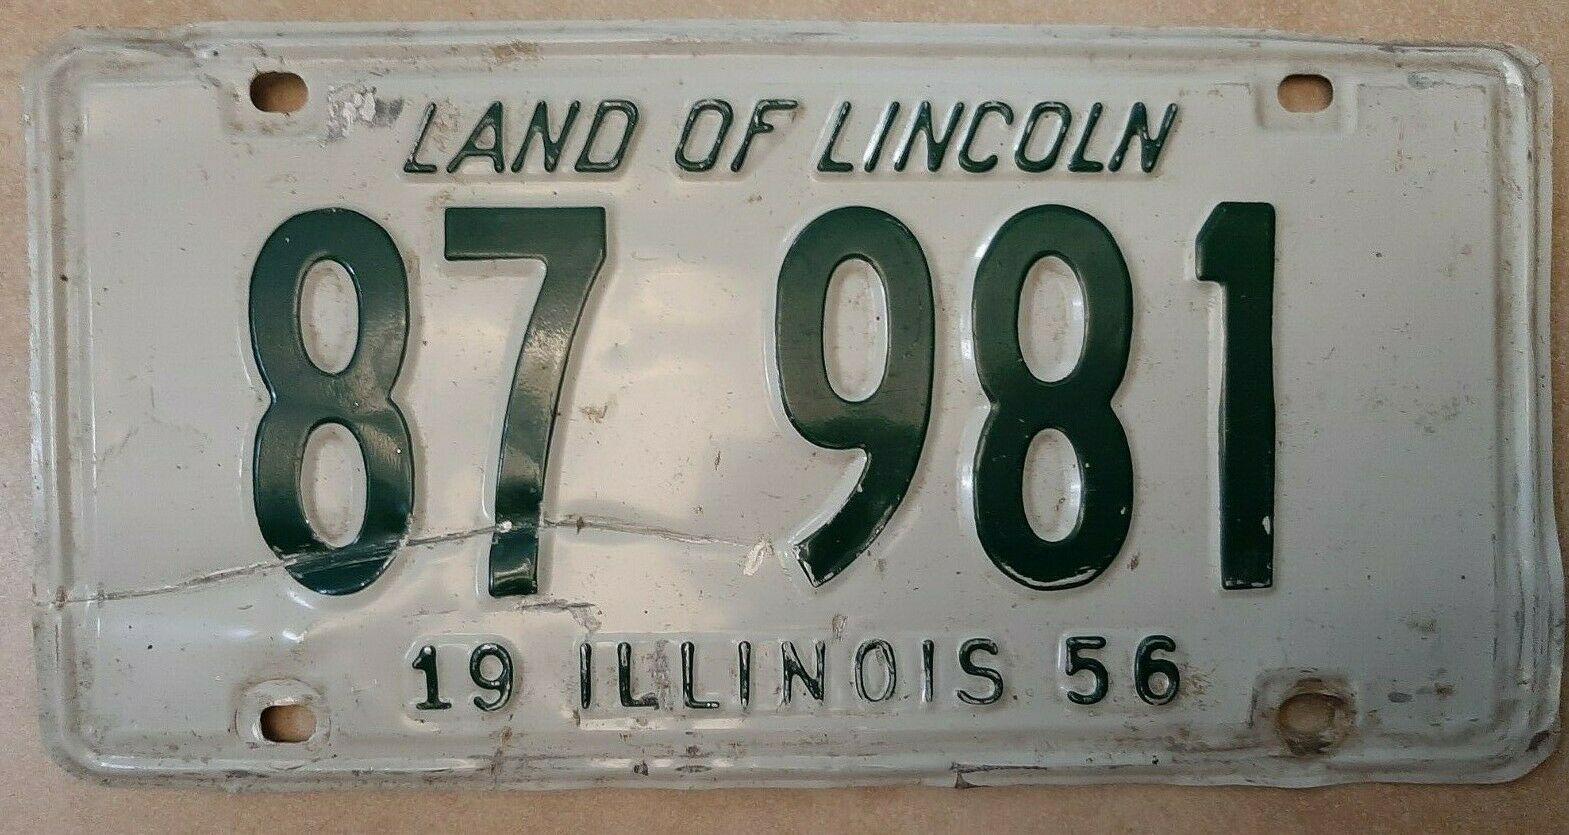 1956 Illinois Land Of Lincoln 87 981 License Plate